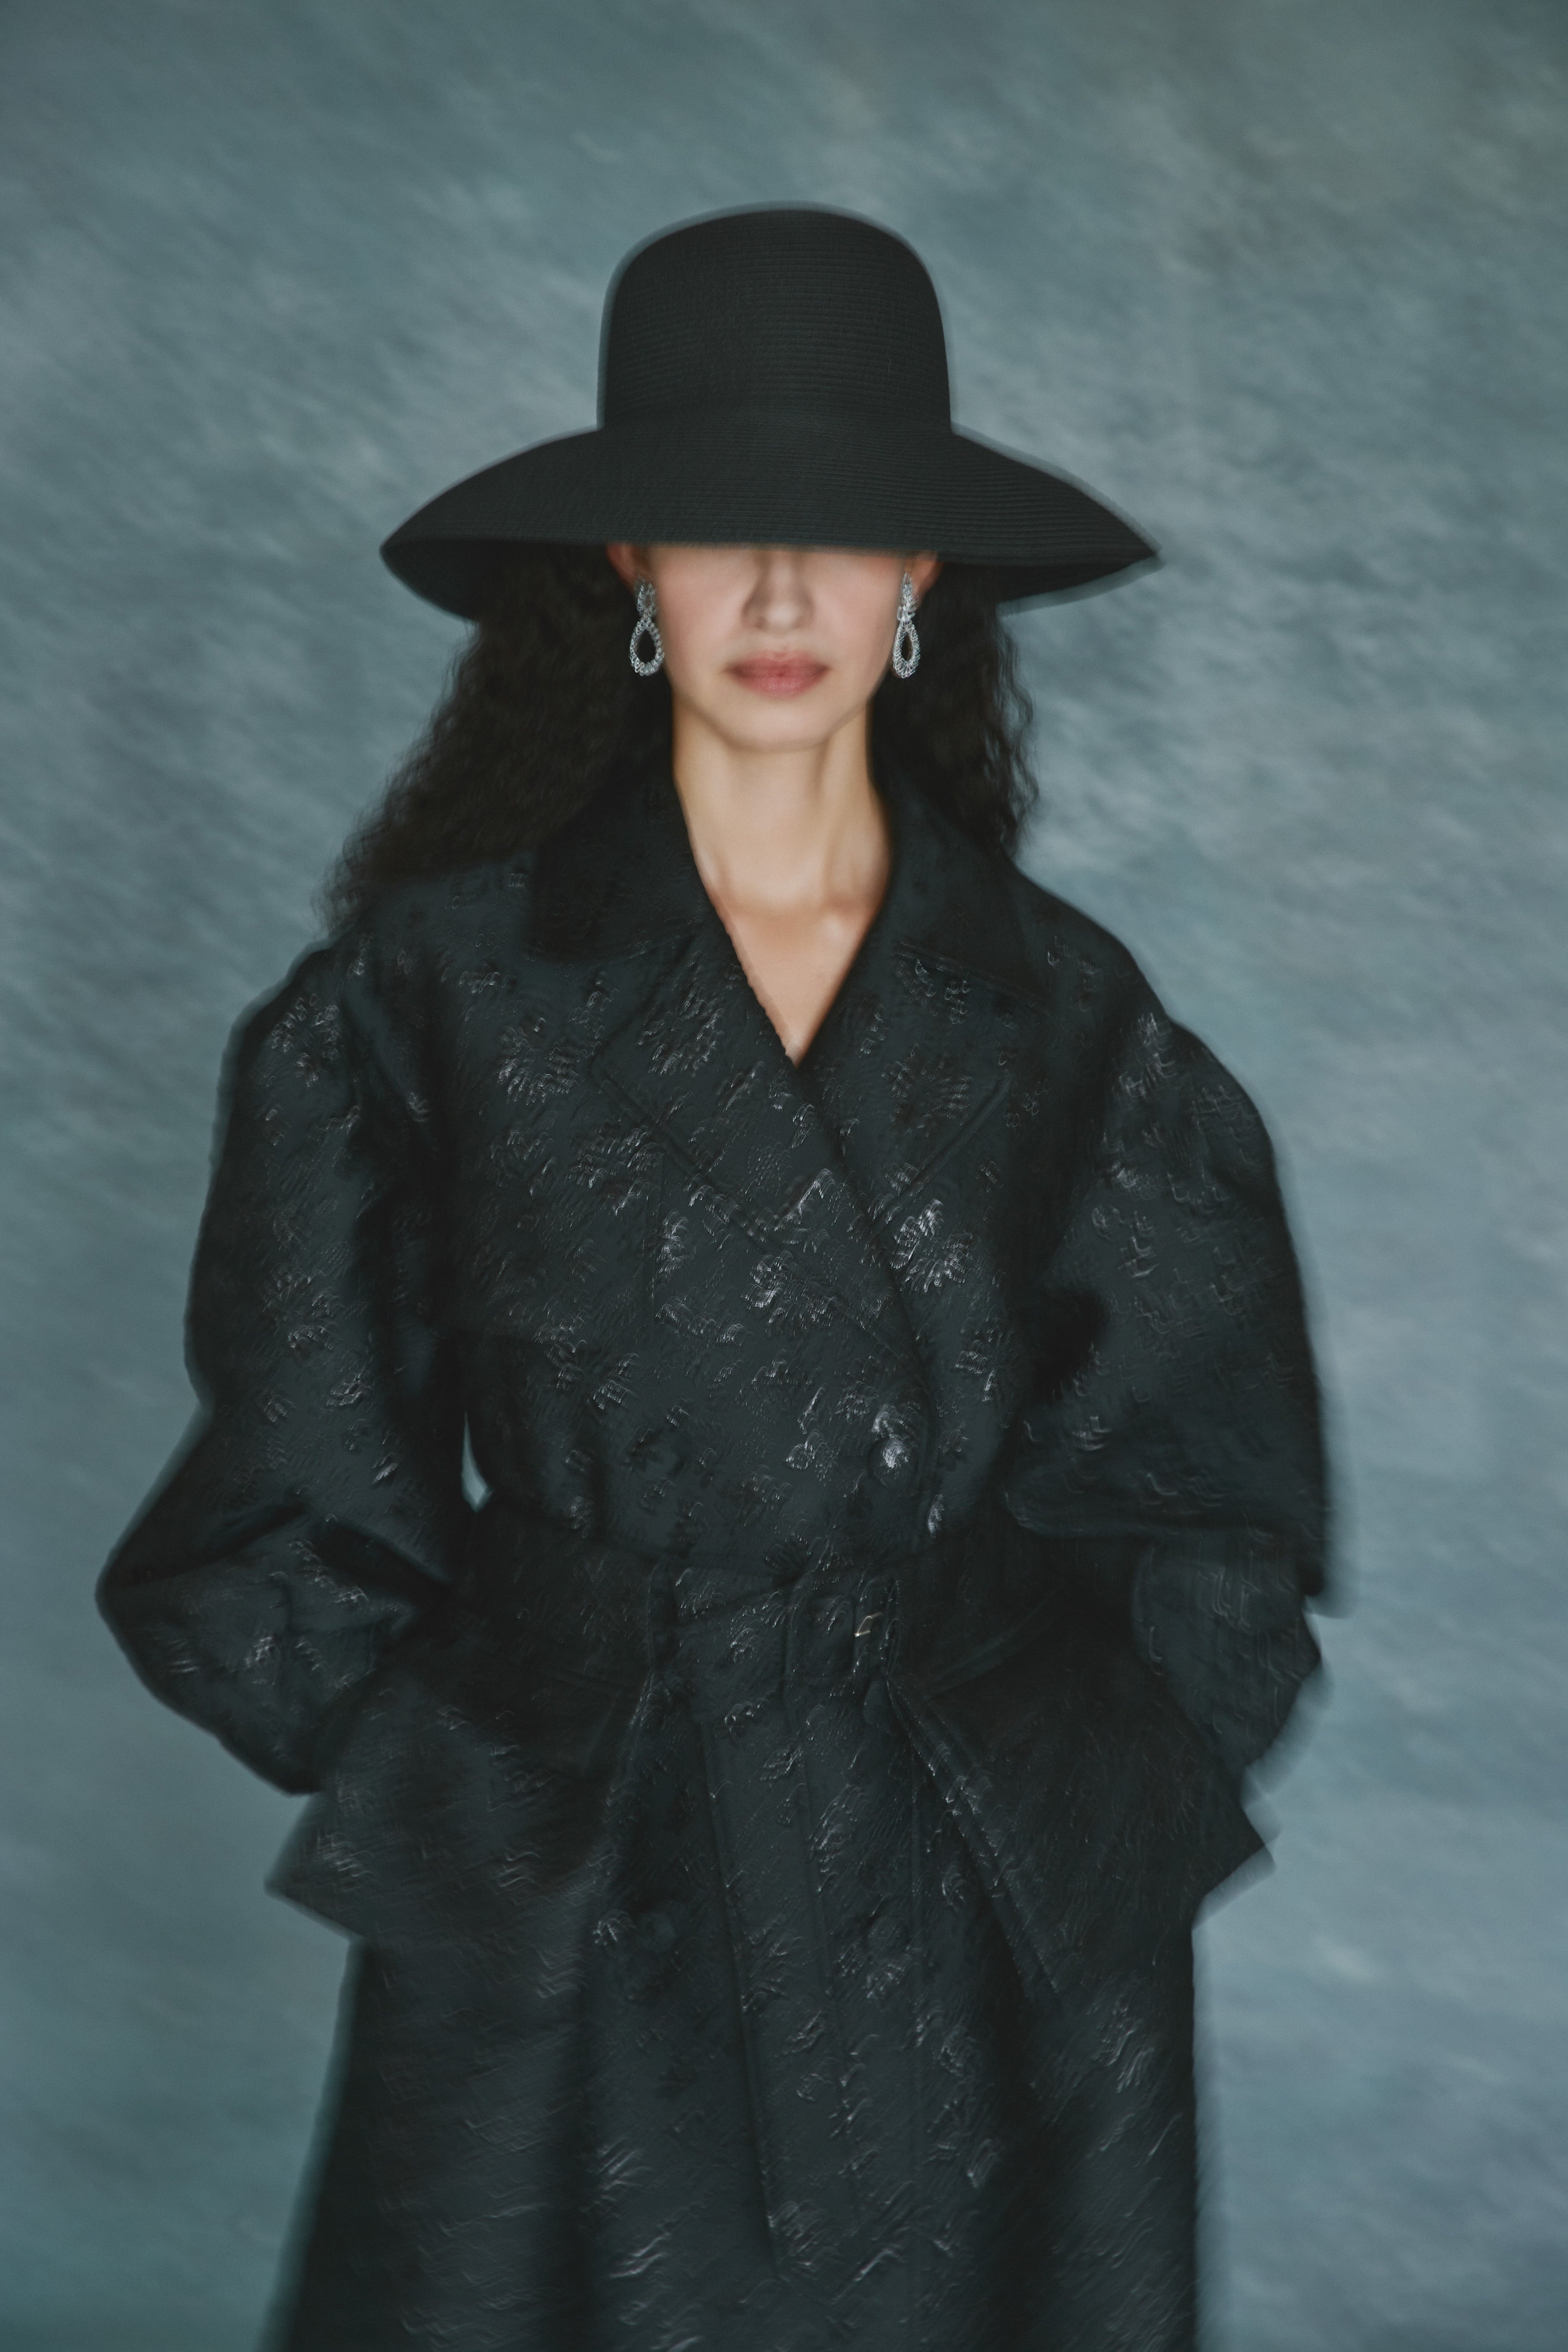 Alexandra Pijut Riding Trench in black brocade, oversized trench coat, demi couture, evening coat.